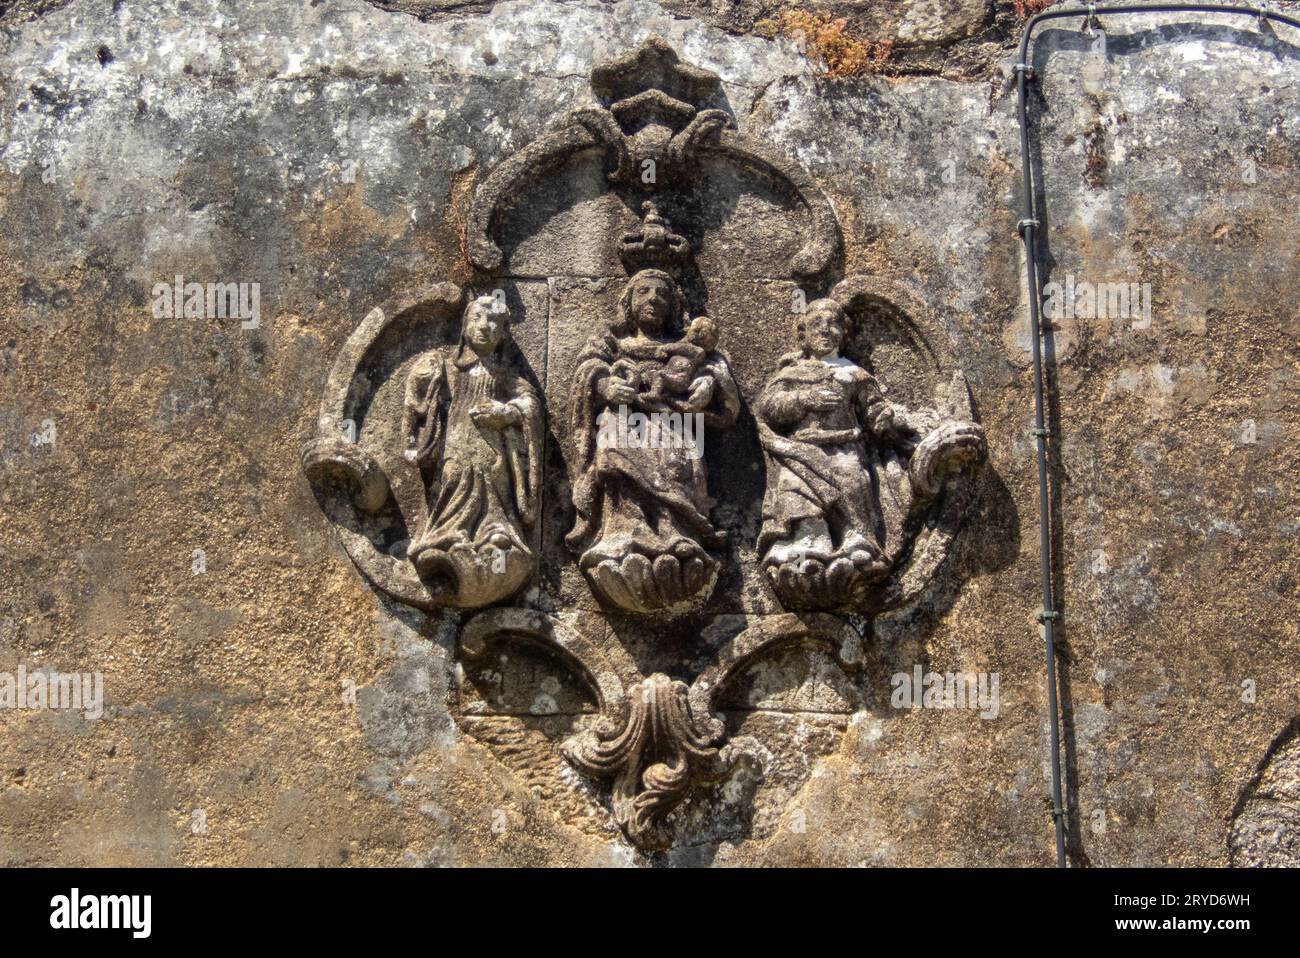 A magnificent relief of the Virgin Mary, Mother of God, on the wall of a not so magnificent ruined and deserted house in the village of Carvalhal in Northern Portugal Stock Photo